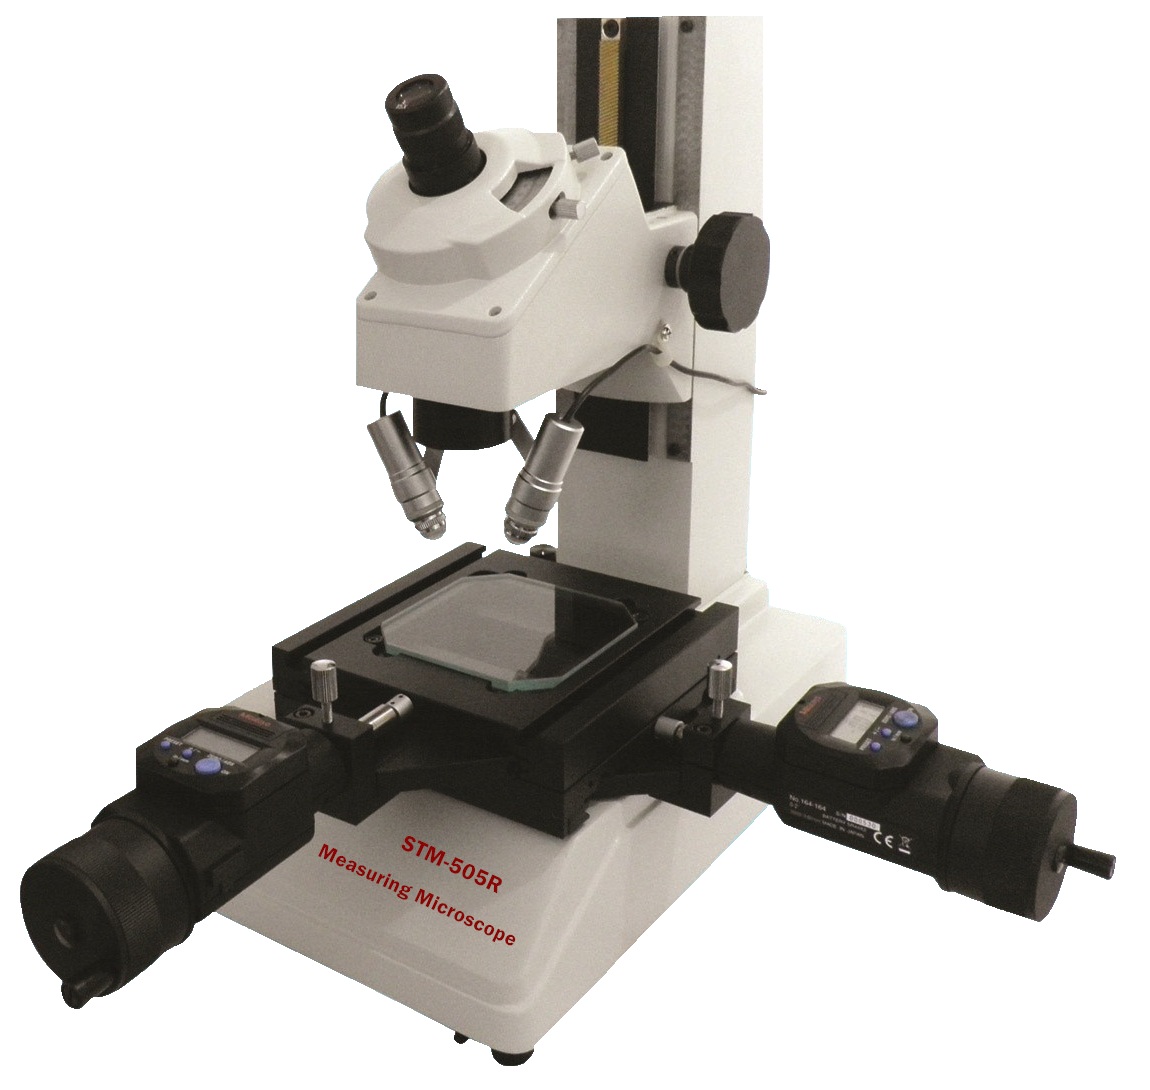 Tool-Makers Microscopes STM-505R